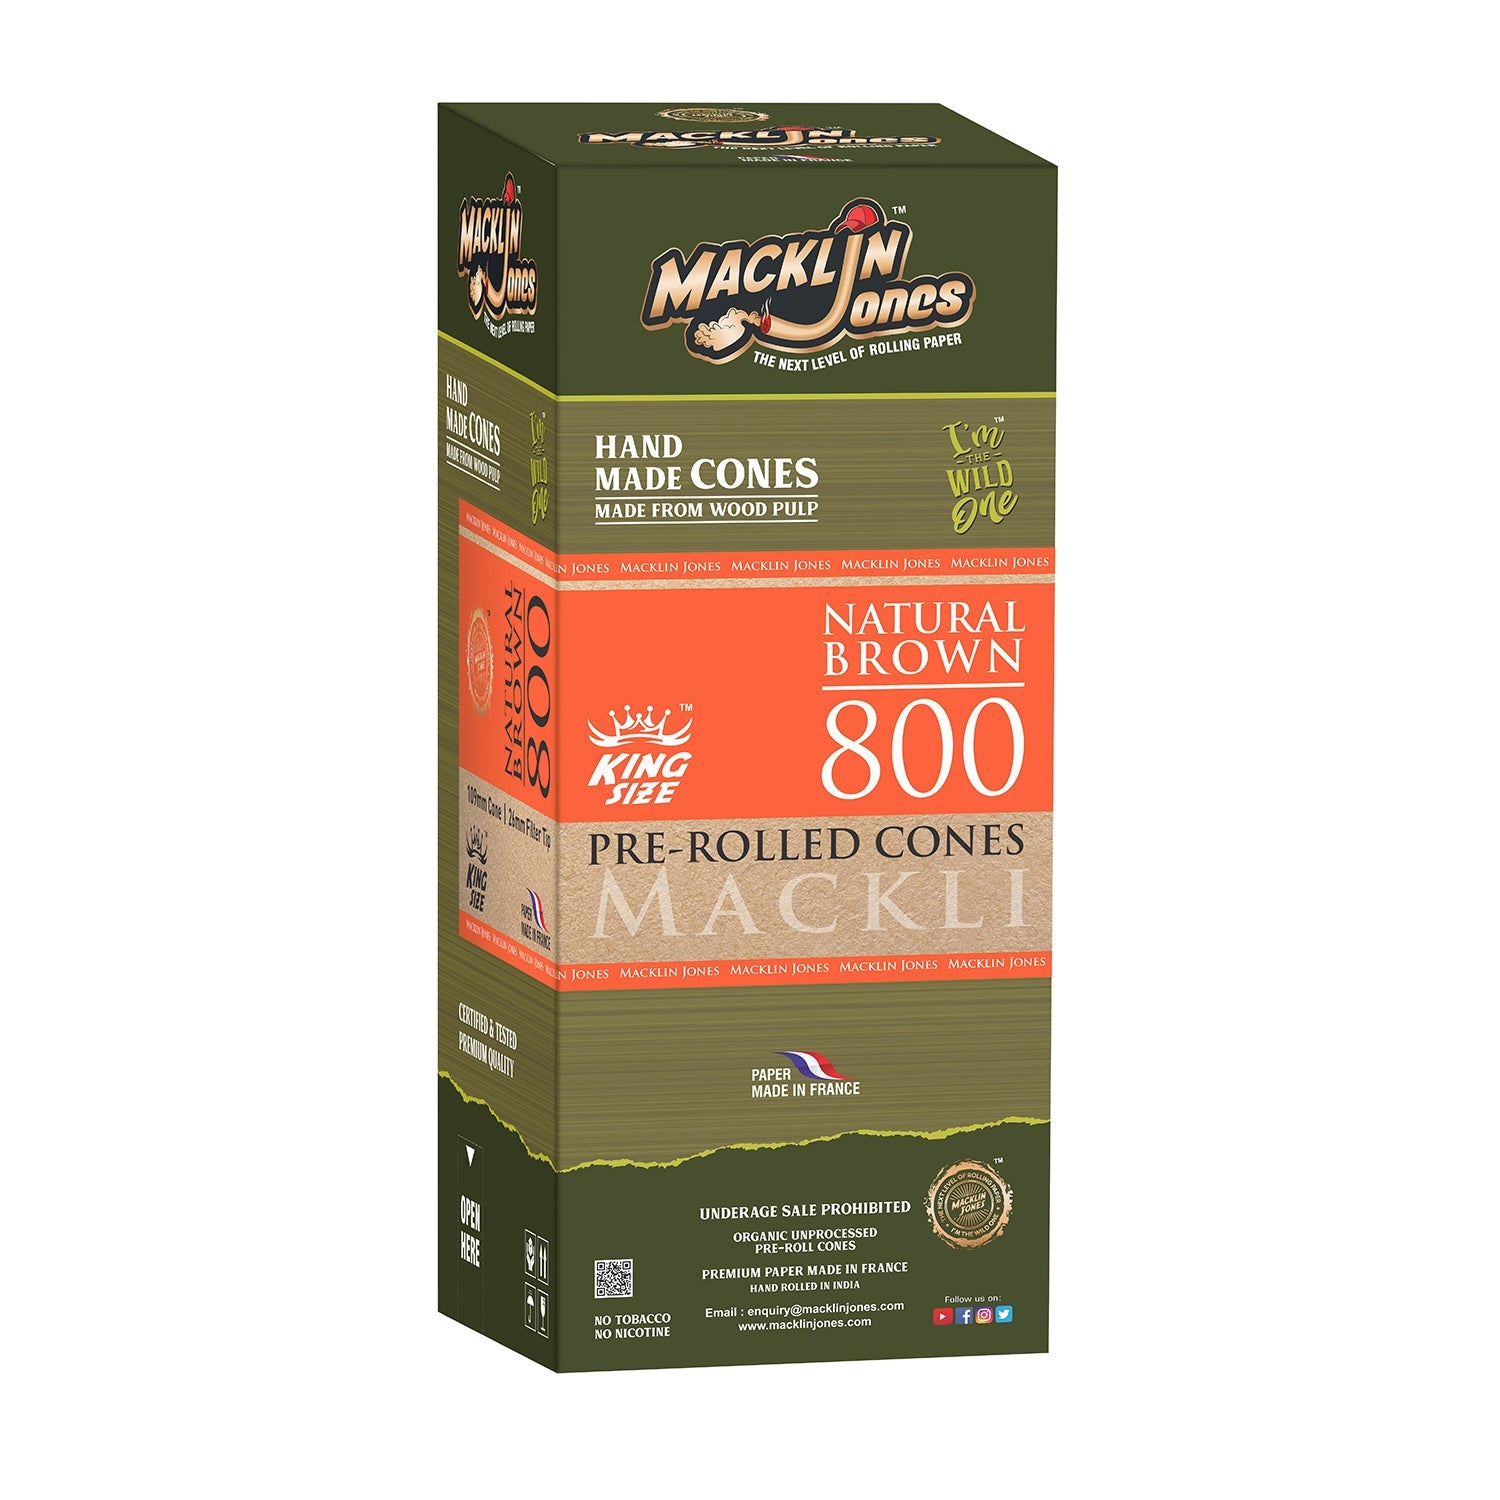 Macklin Jones - Natural Brown King Size Pre-Rolled cones Tower 800_0